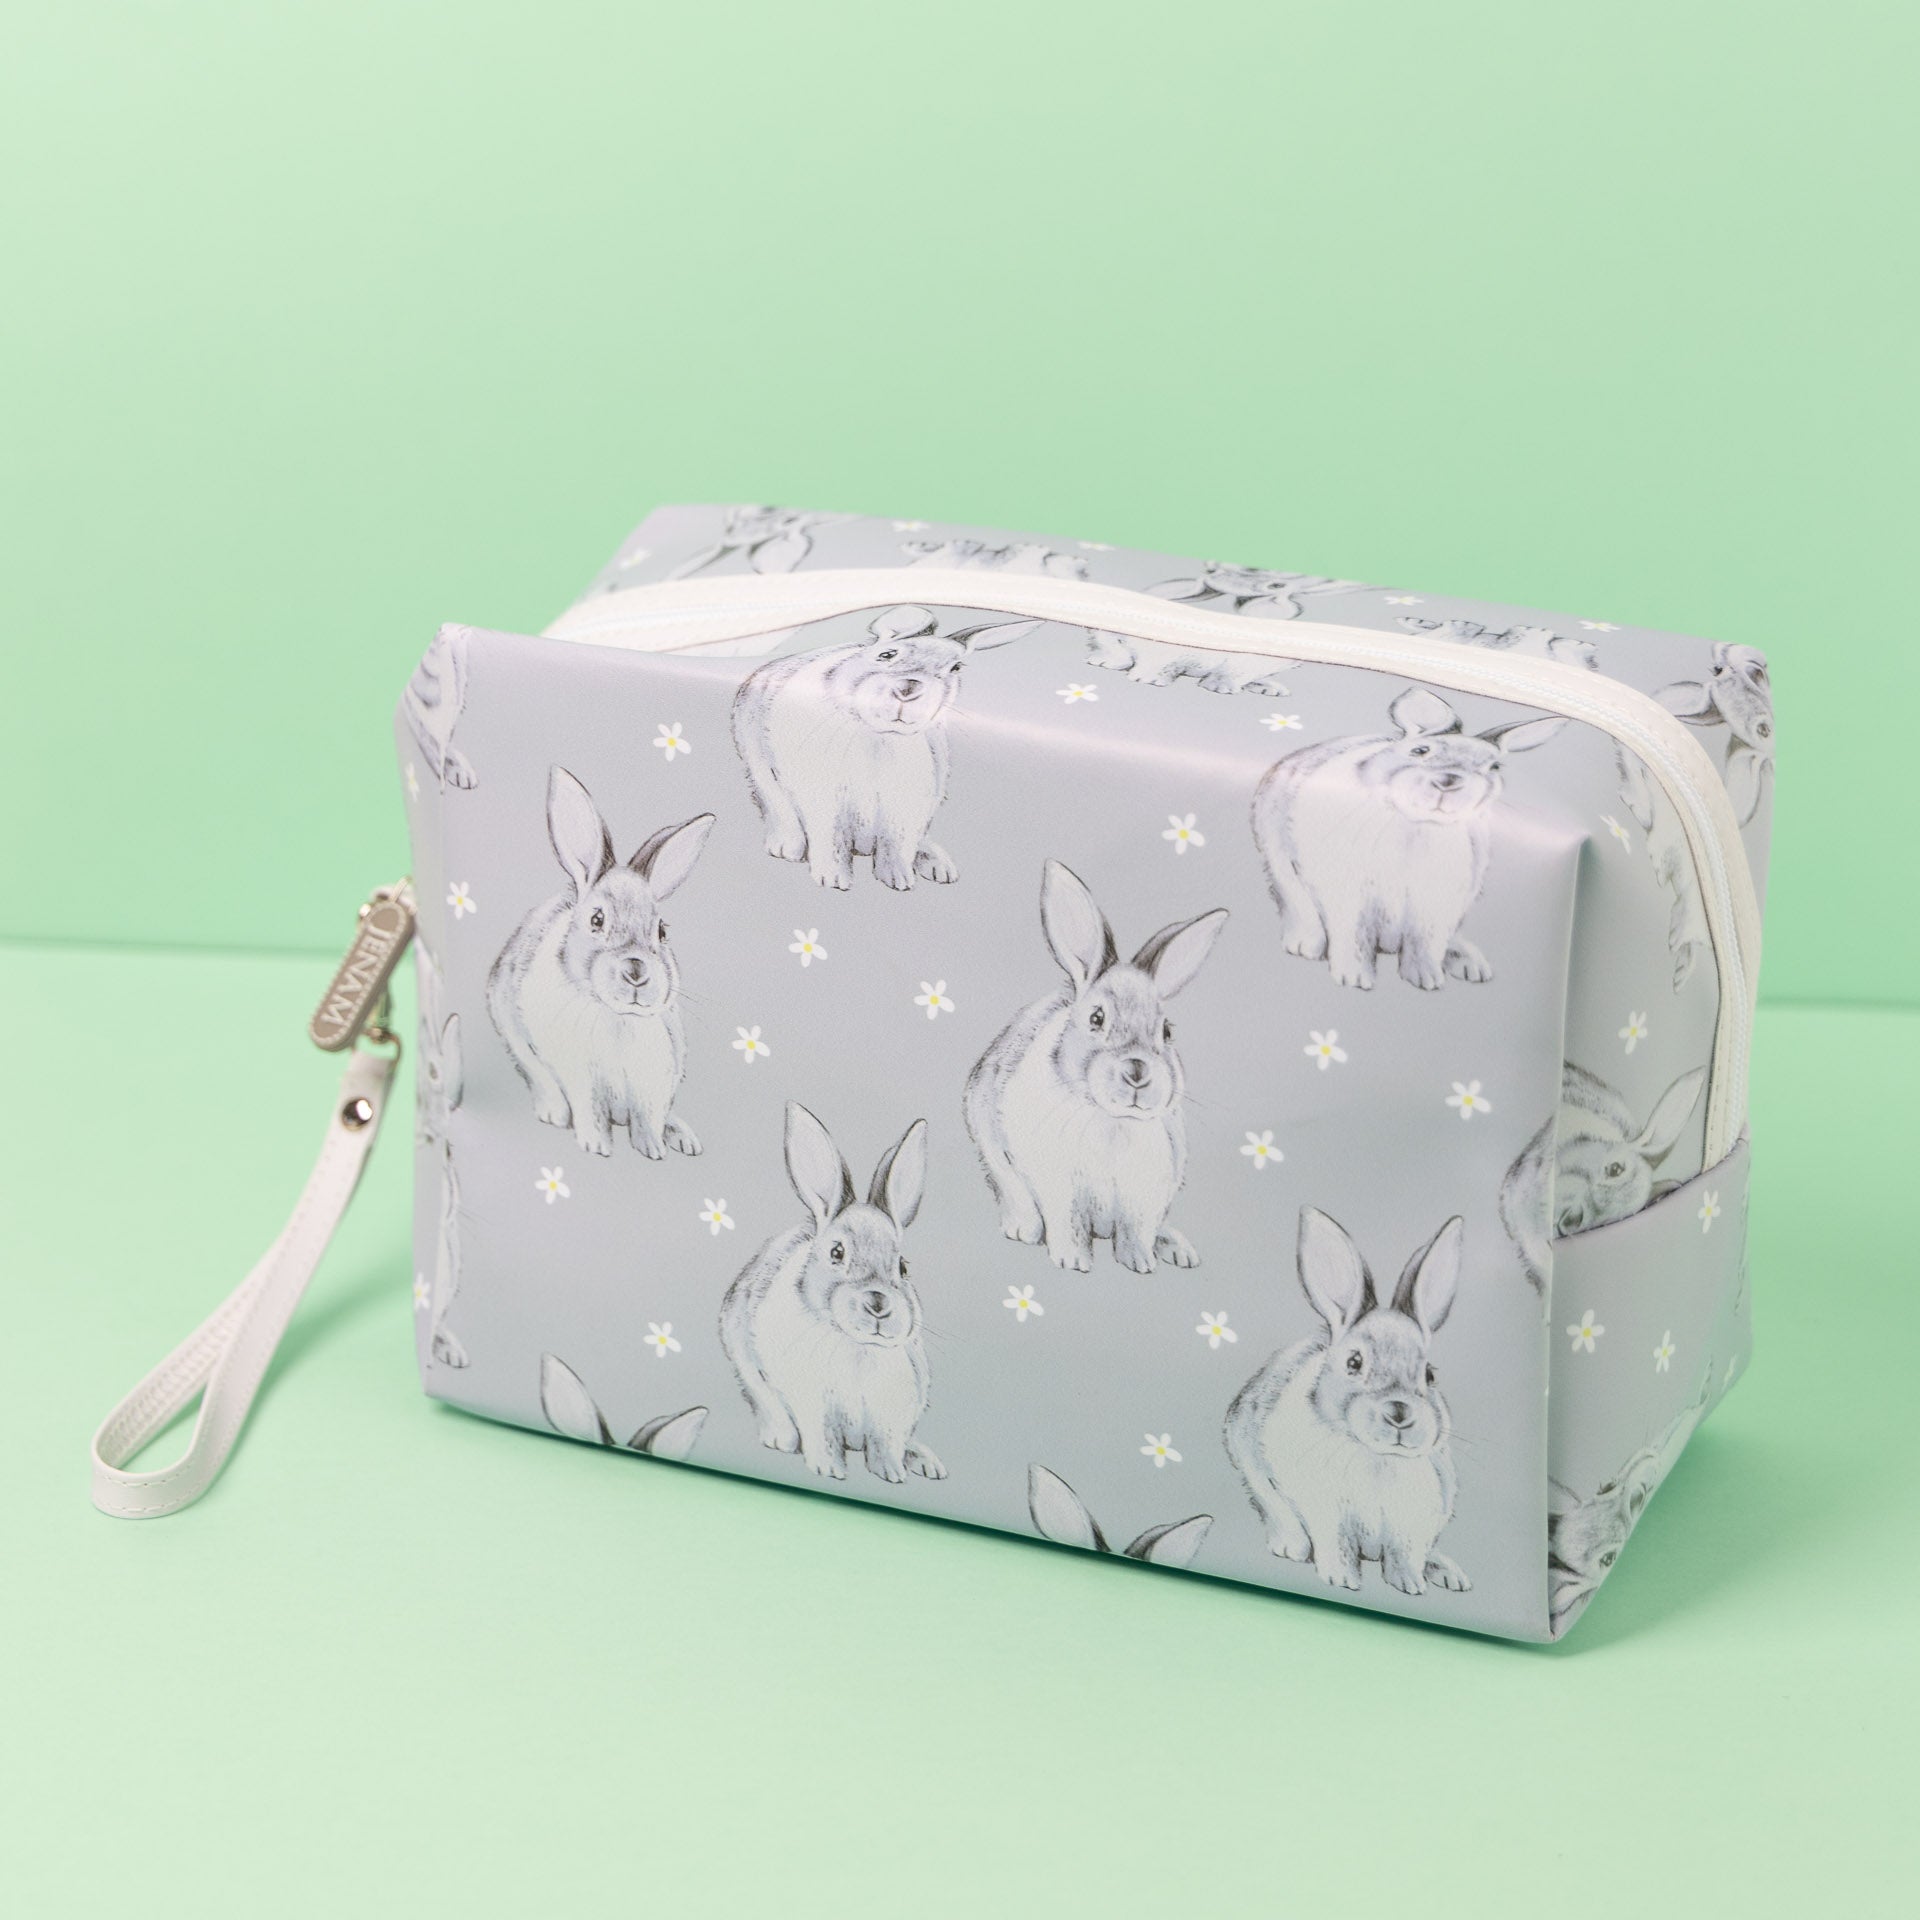 Bunny Cosmetics Bags (assorted sizes)